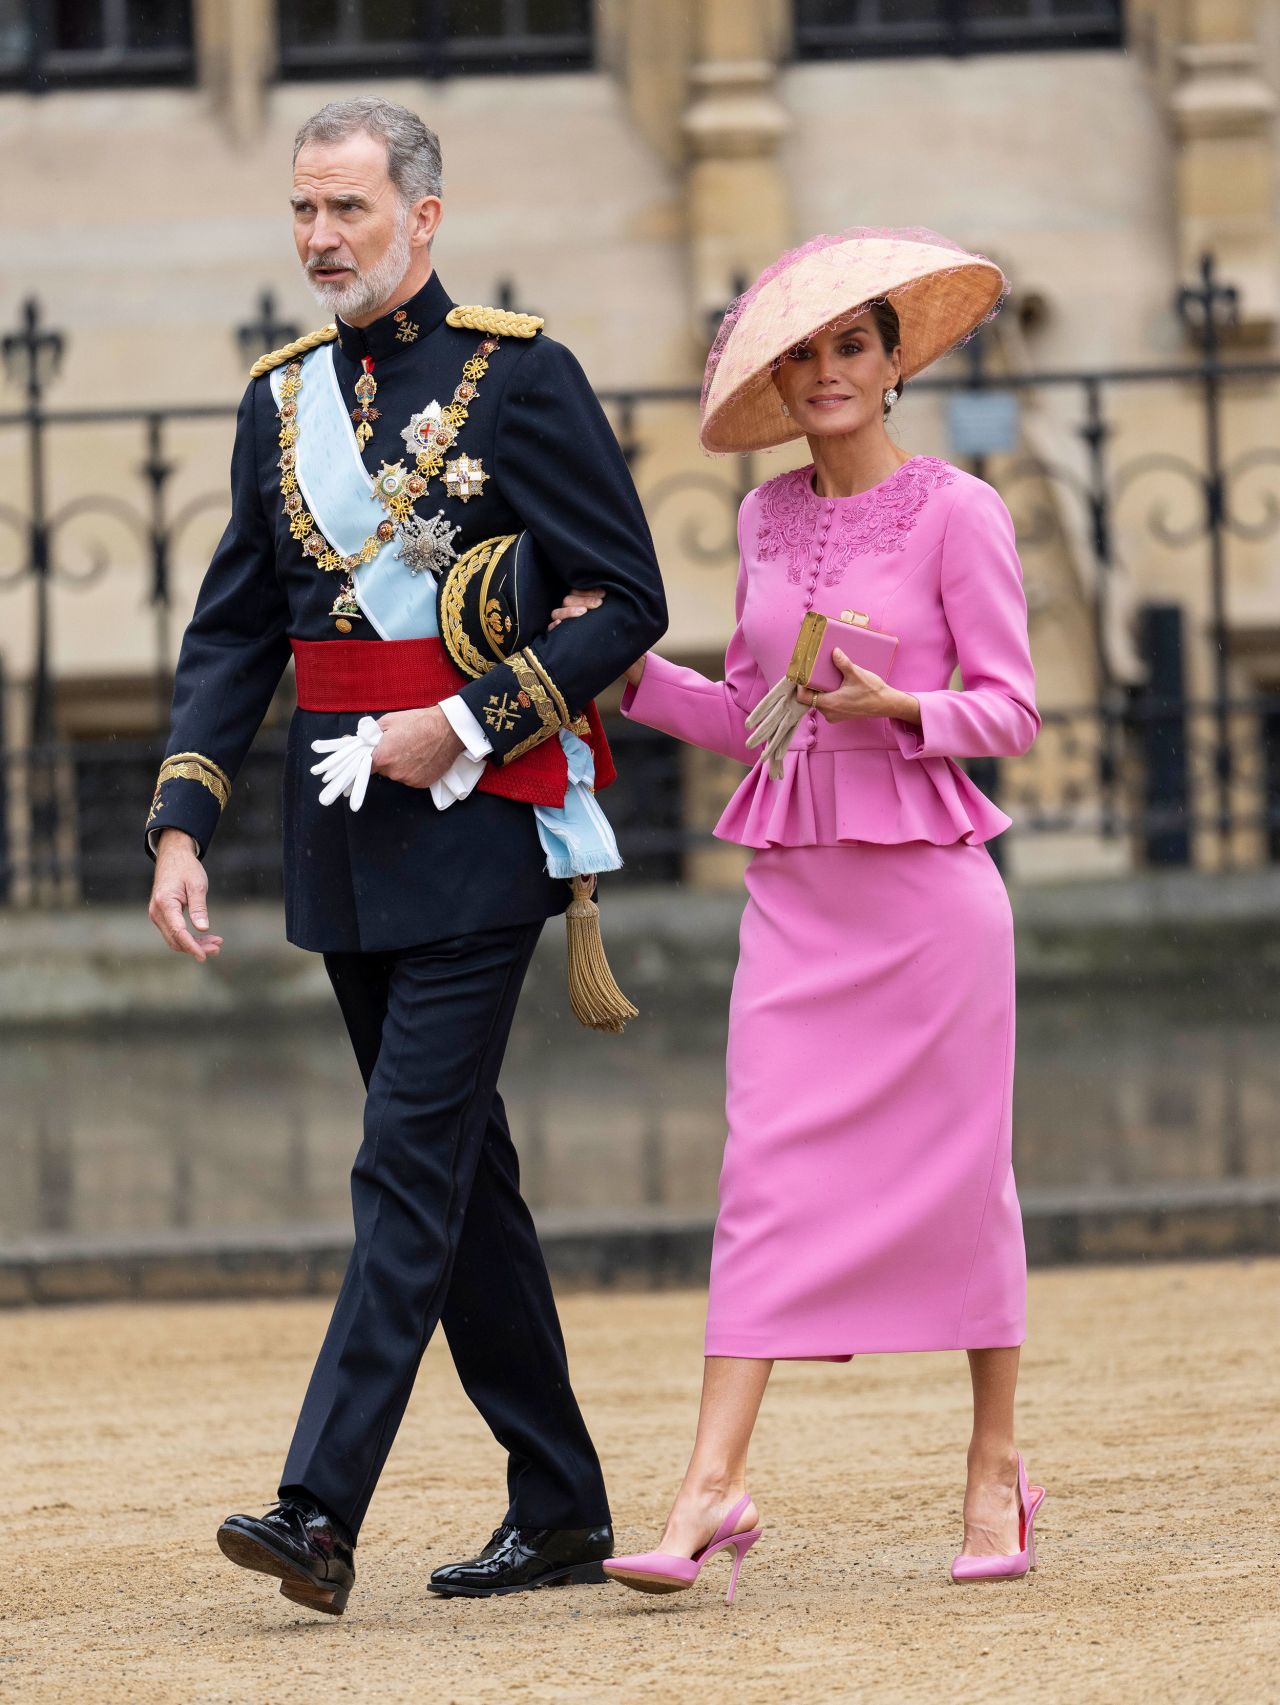  King Felipe of Spain and Queen Letizia of Spain are seen at Westminster Abbey.